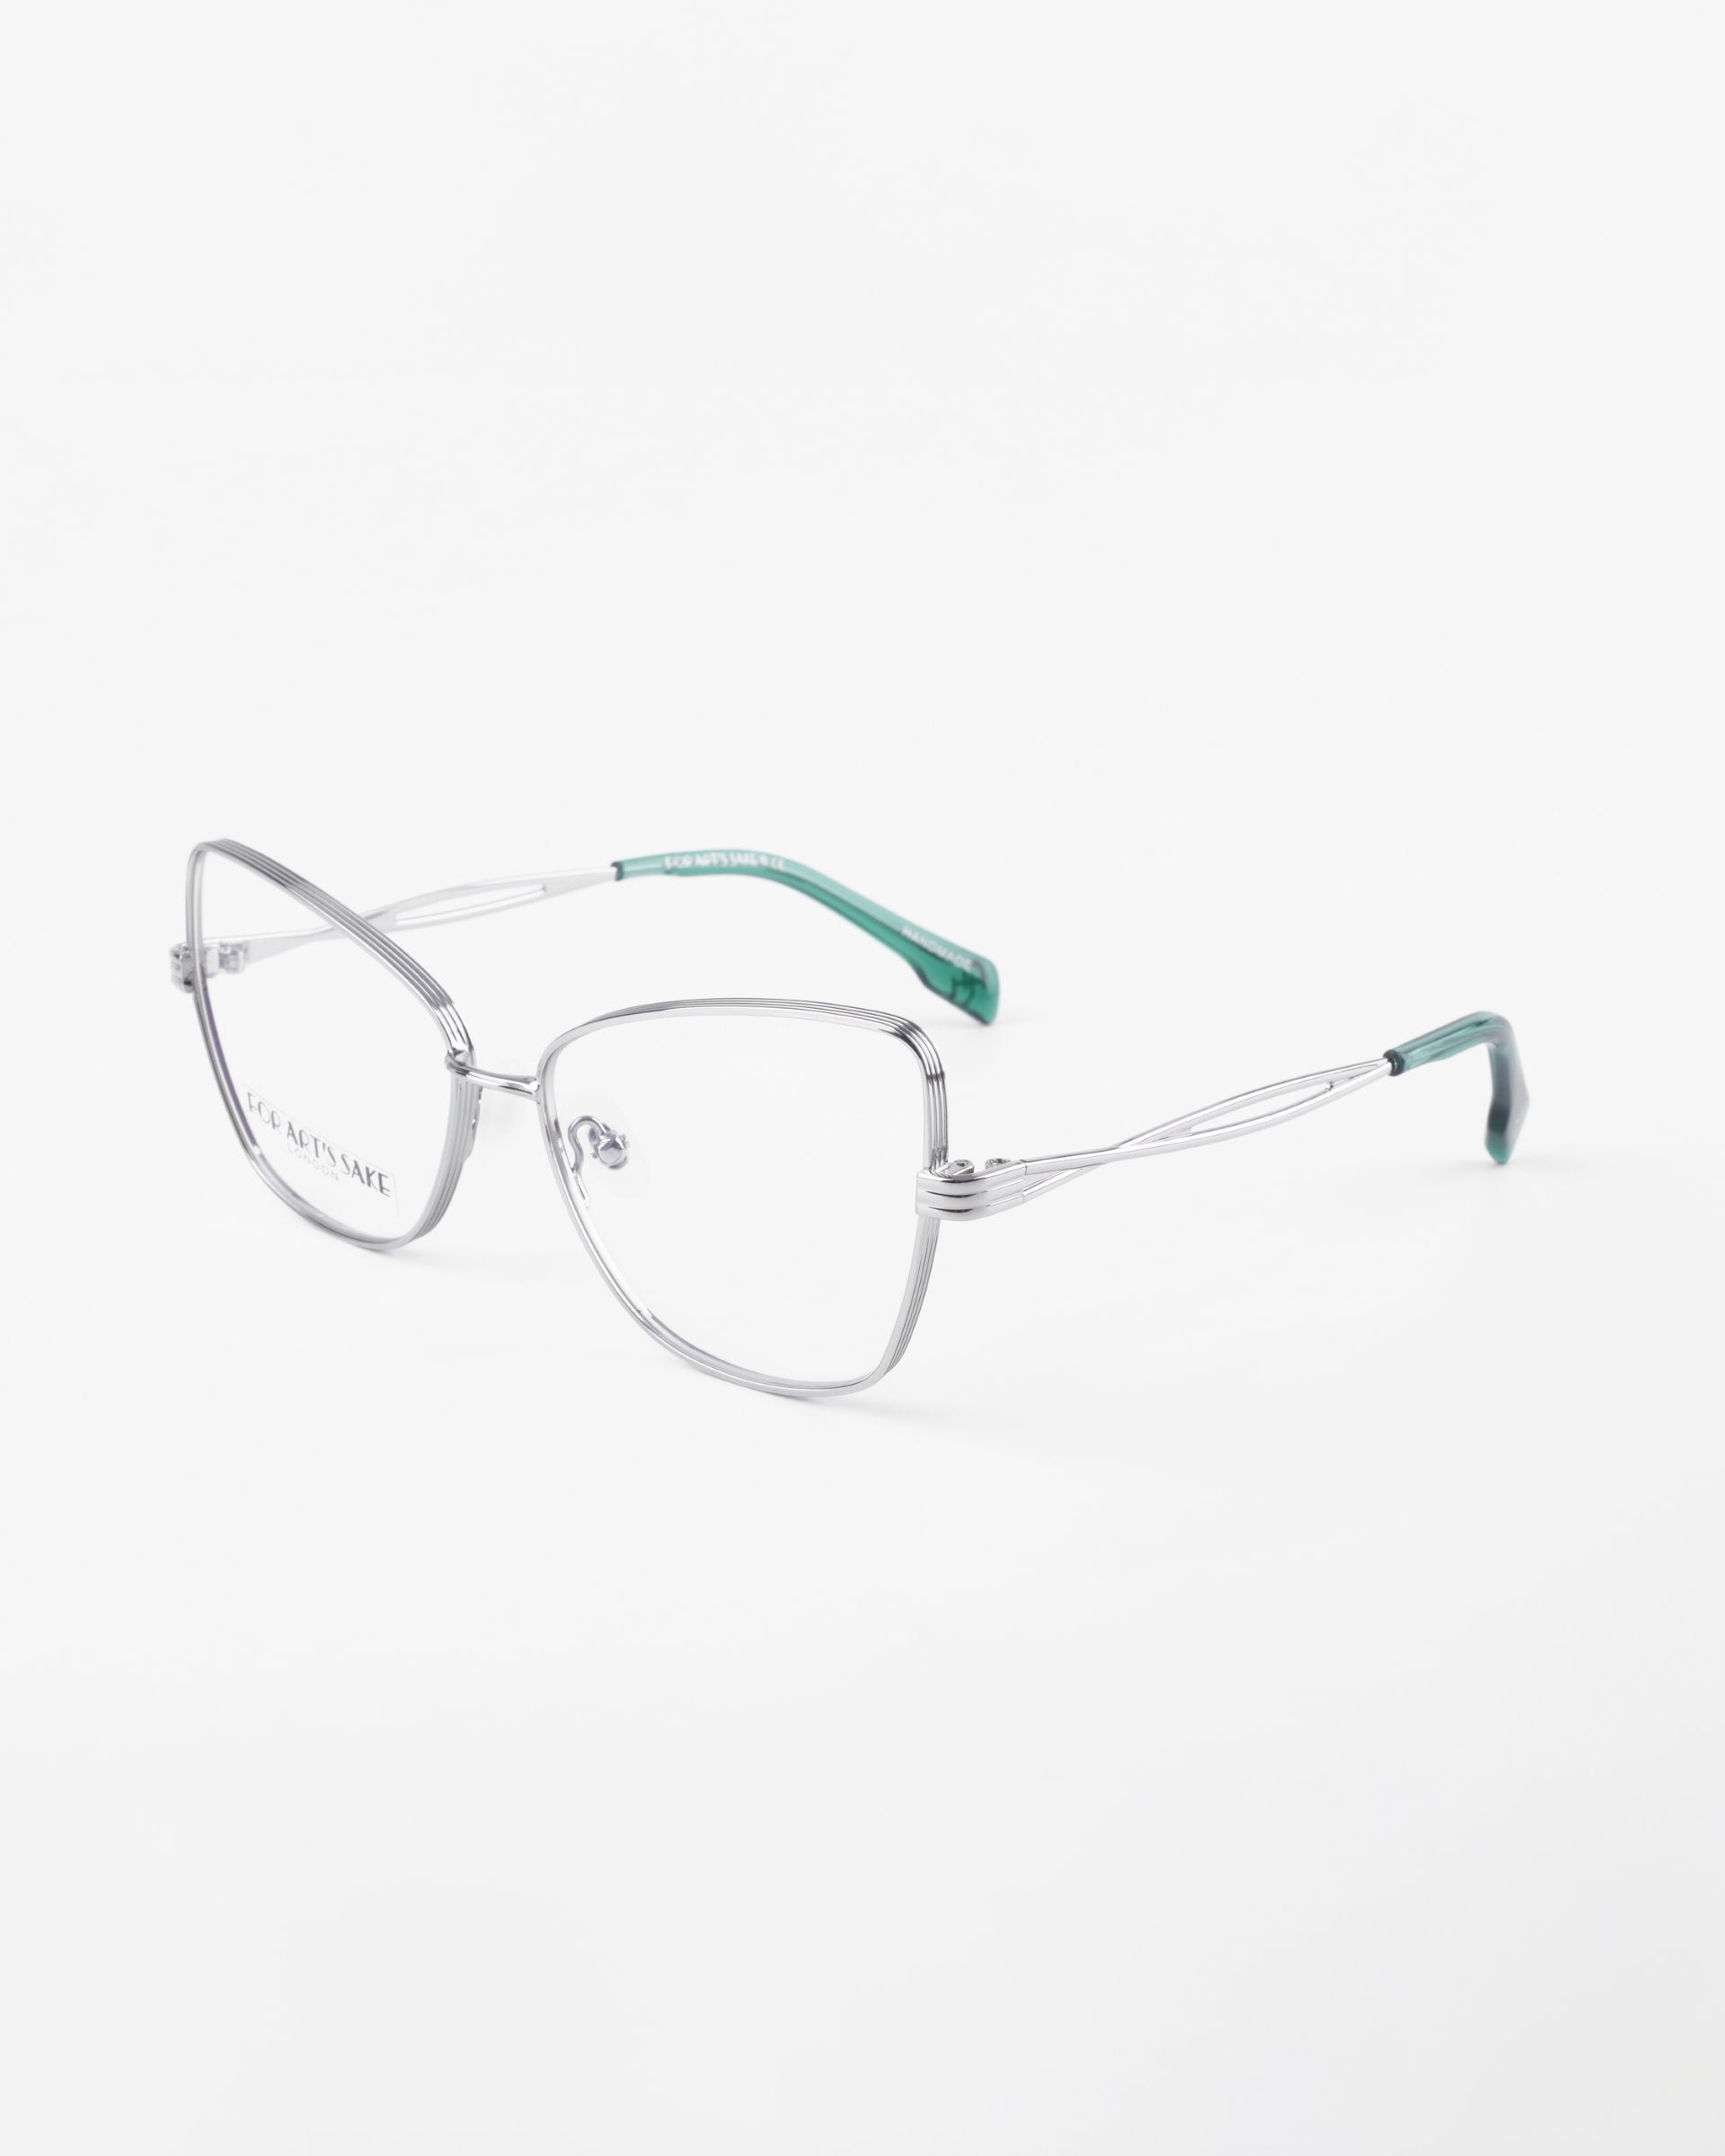 A pair of stylish eyeglasses with thin, silver metal frames and clear lenses. The temples are predominantly silver with green tips. Featuring a sleek, modern design suitable for everyday wear, the "Lady" frames by For Art's Sake® also offer an optional blue light filter. The background is plain white.